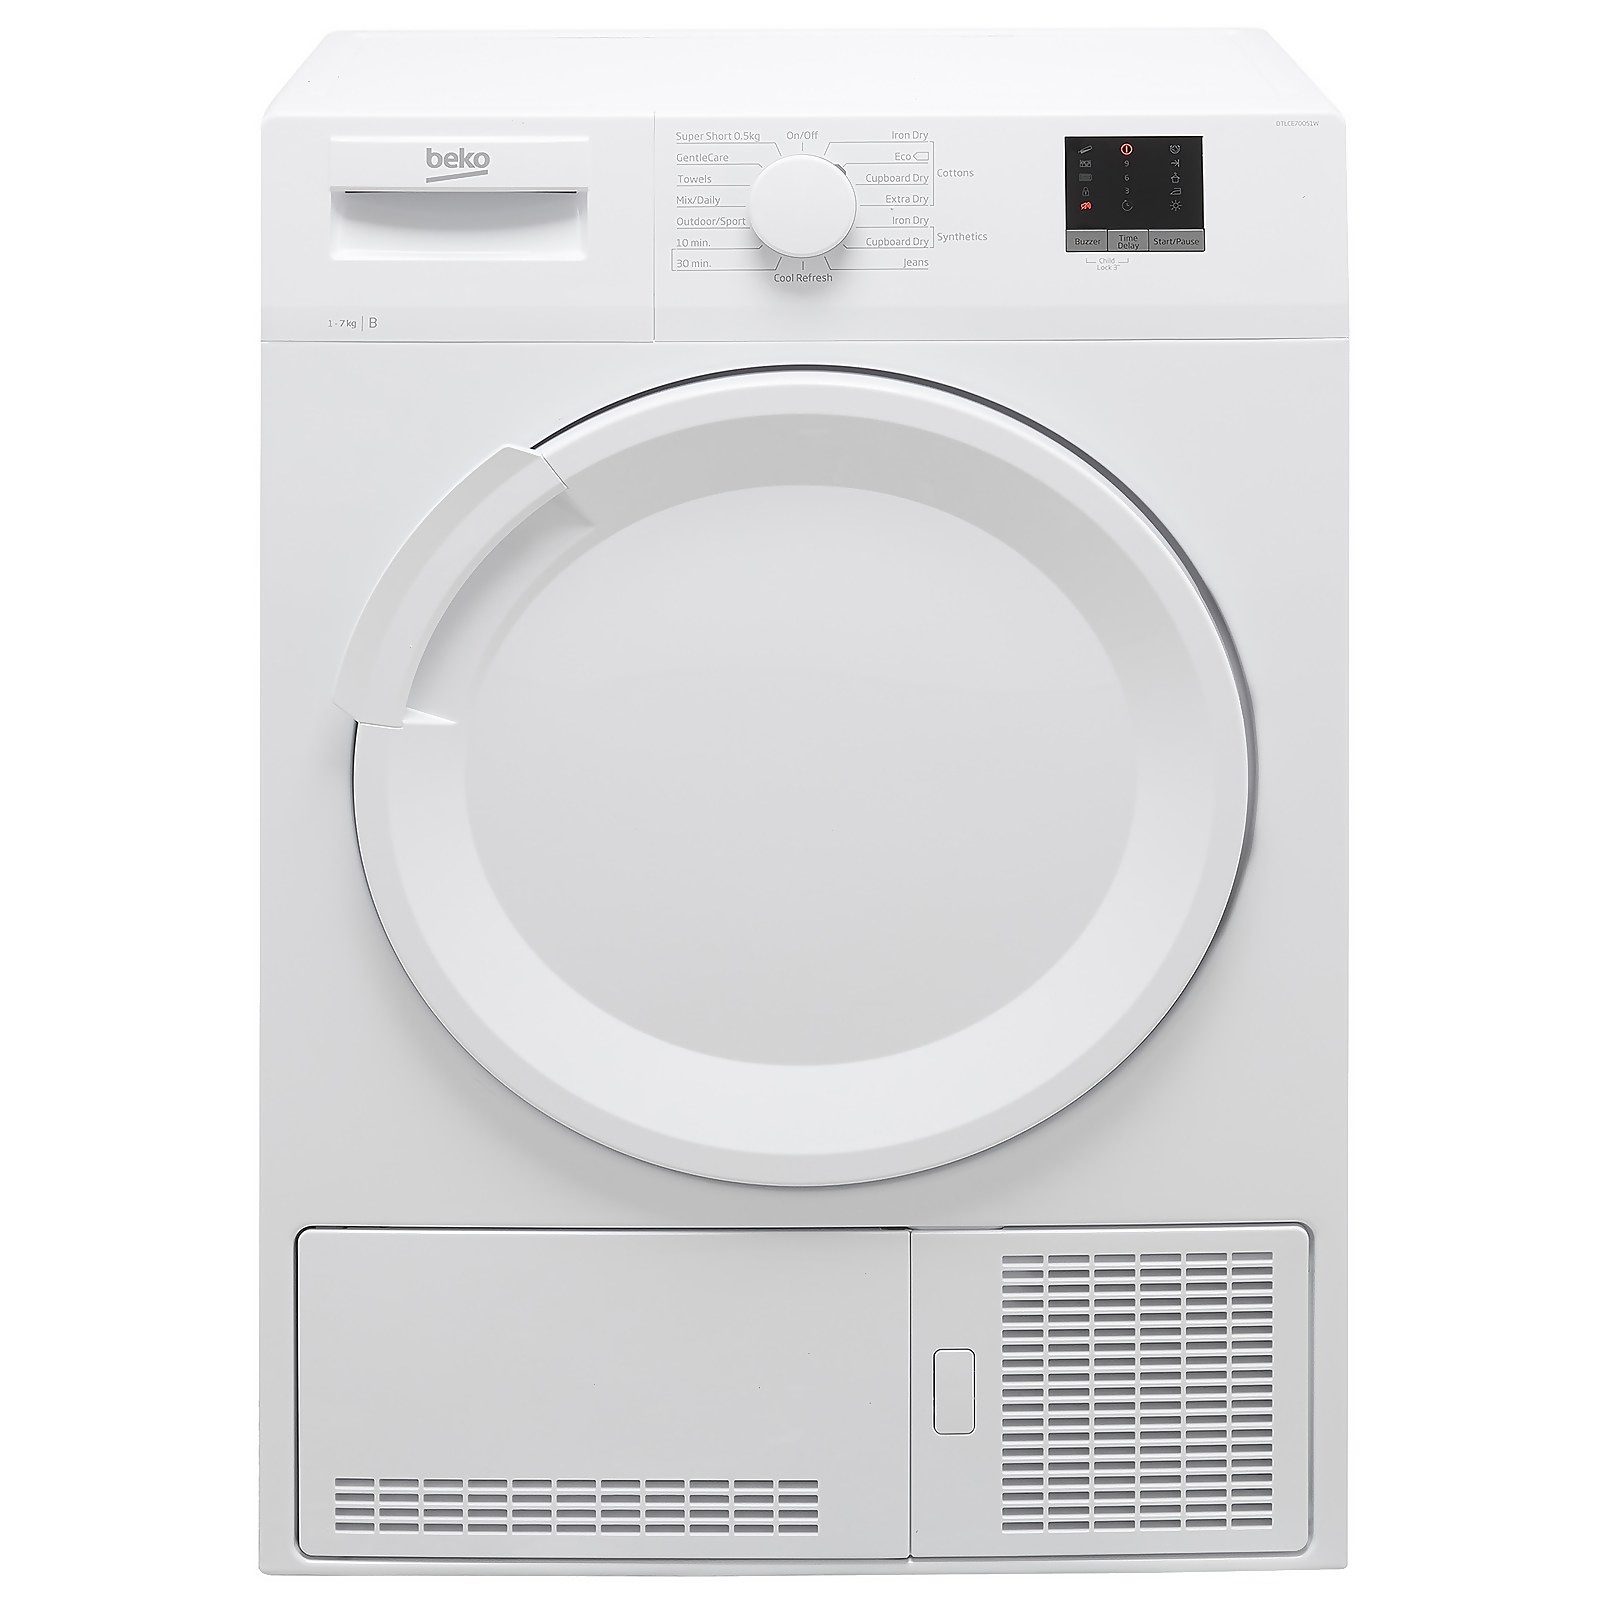 Beko DTLCE70051W 7Kg Condenser Tumble Dryer - White - B Rated